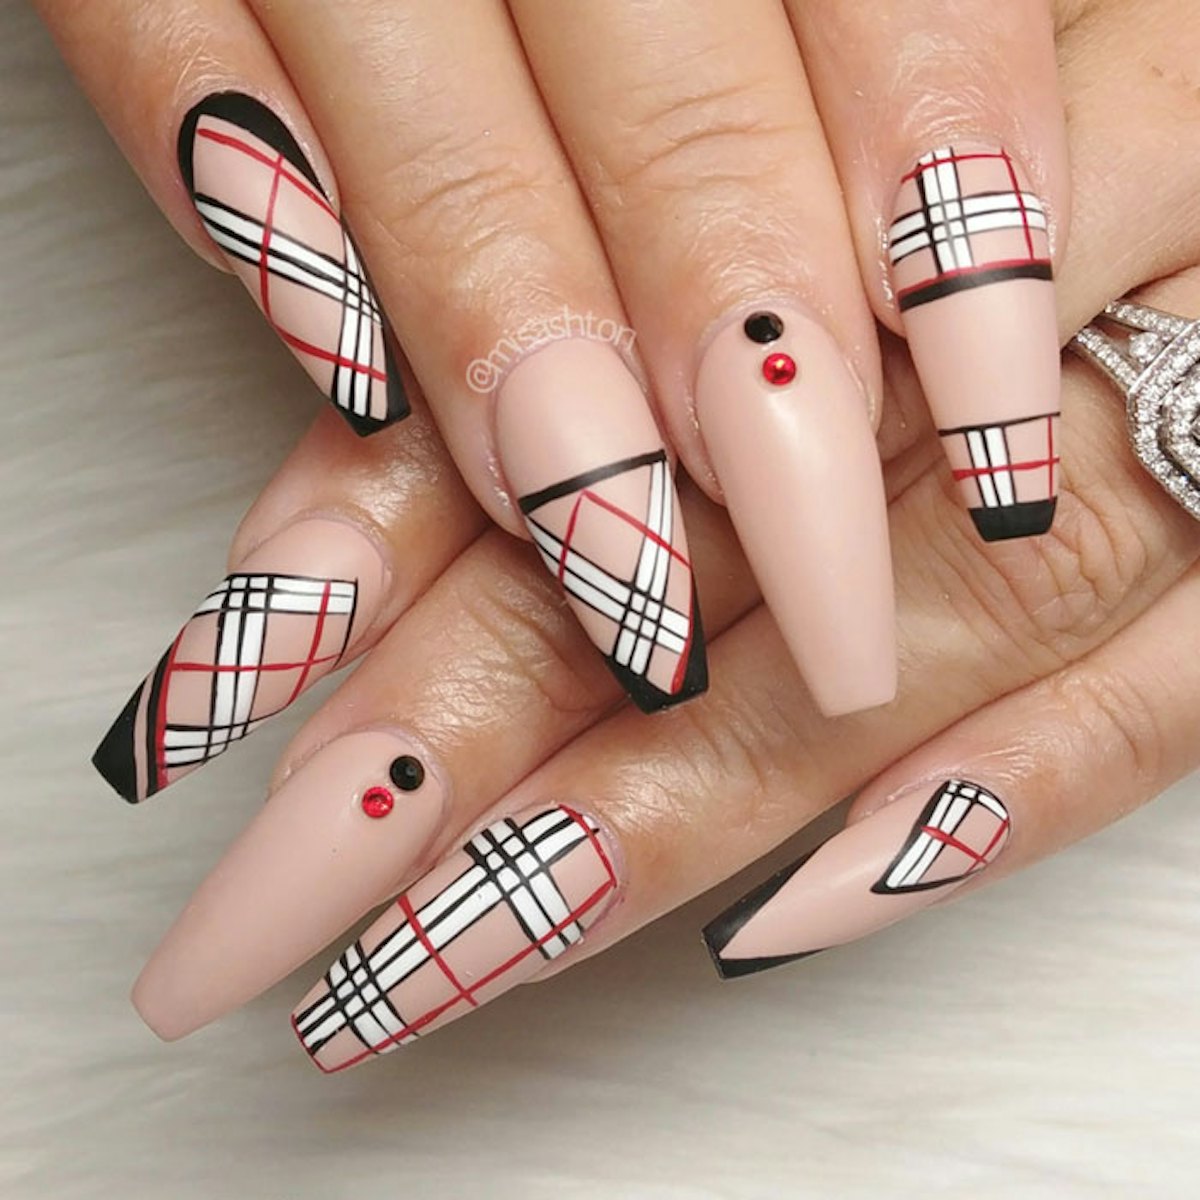 Usher In the Holiday Season With Some Plaid Nail Art